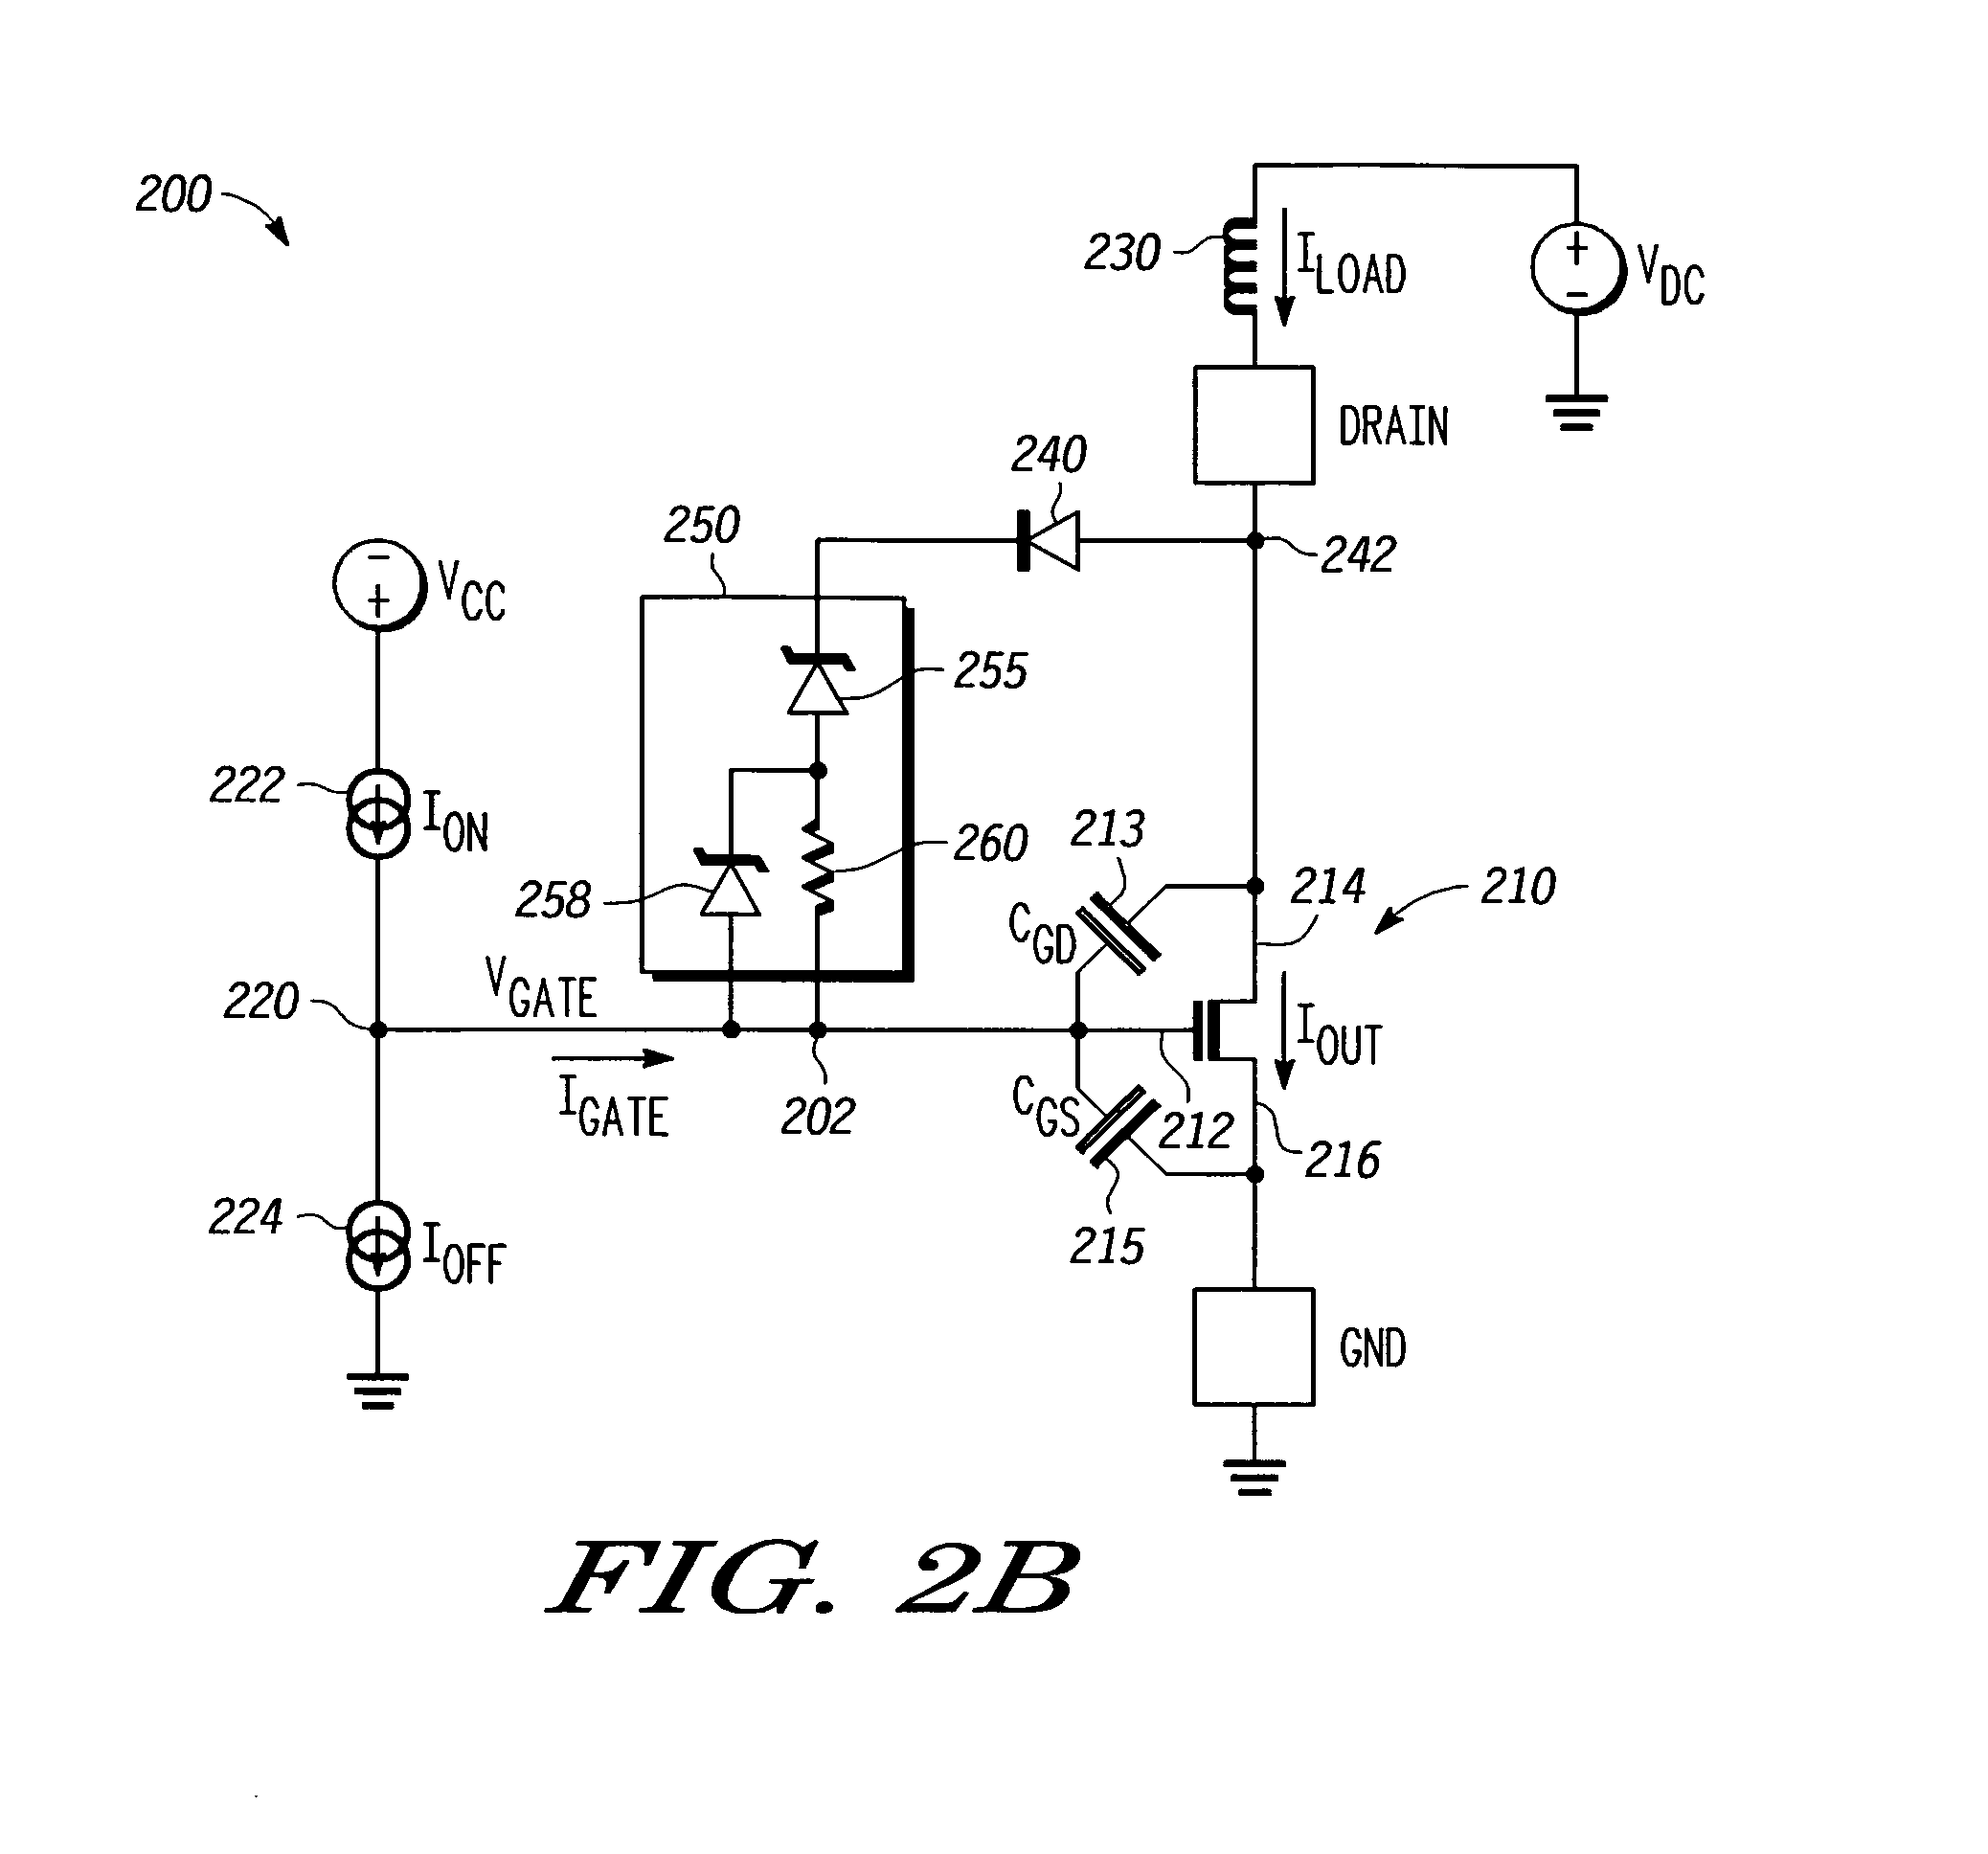 Slew-rate control apparatus and methods for a power transistor to reduce voltage transients during inductive flyback